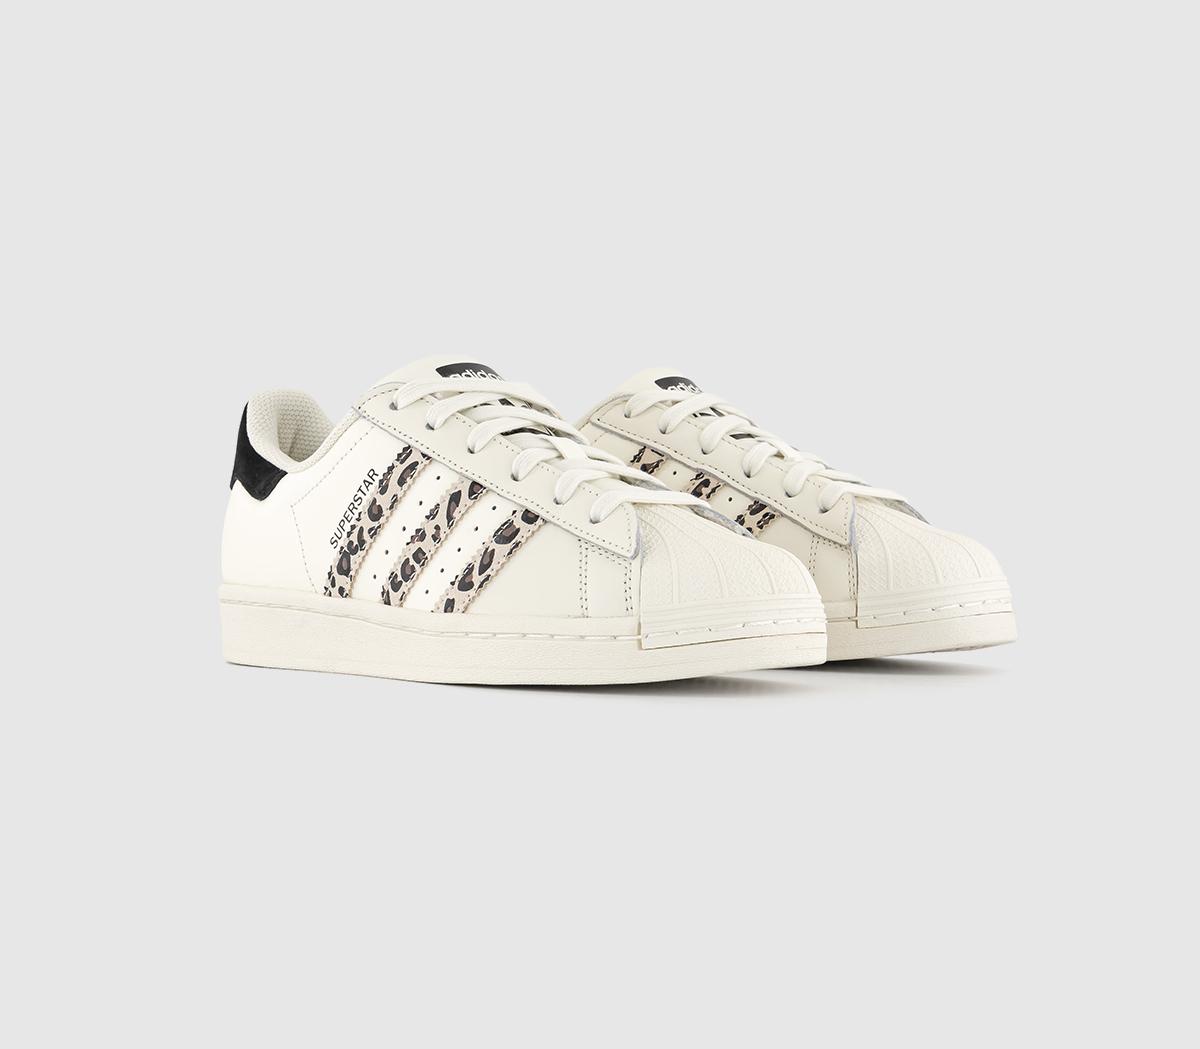 Adidas Womens Superstar Trainers Offwhite Black, 5